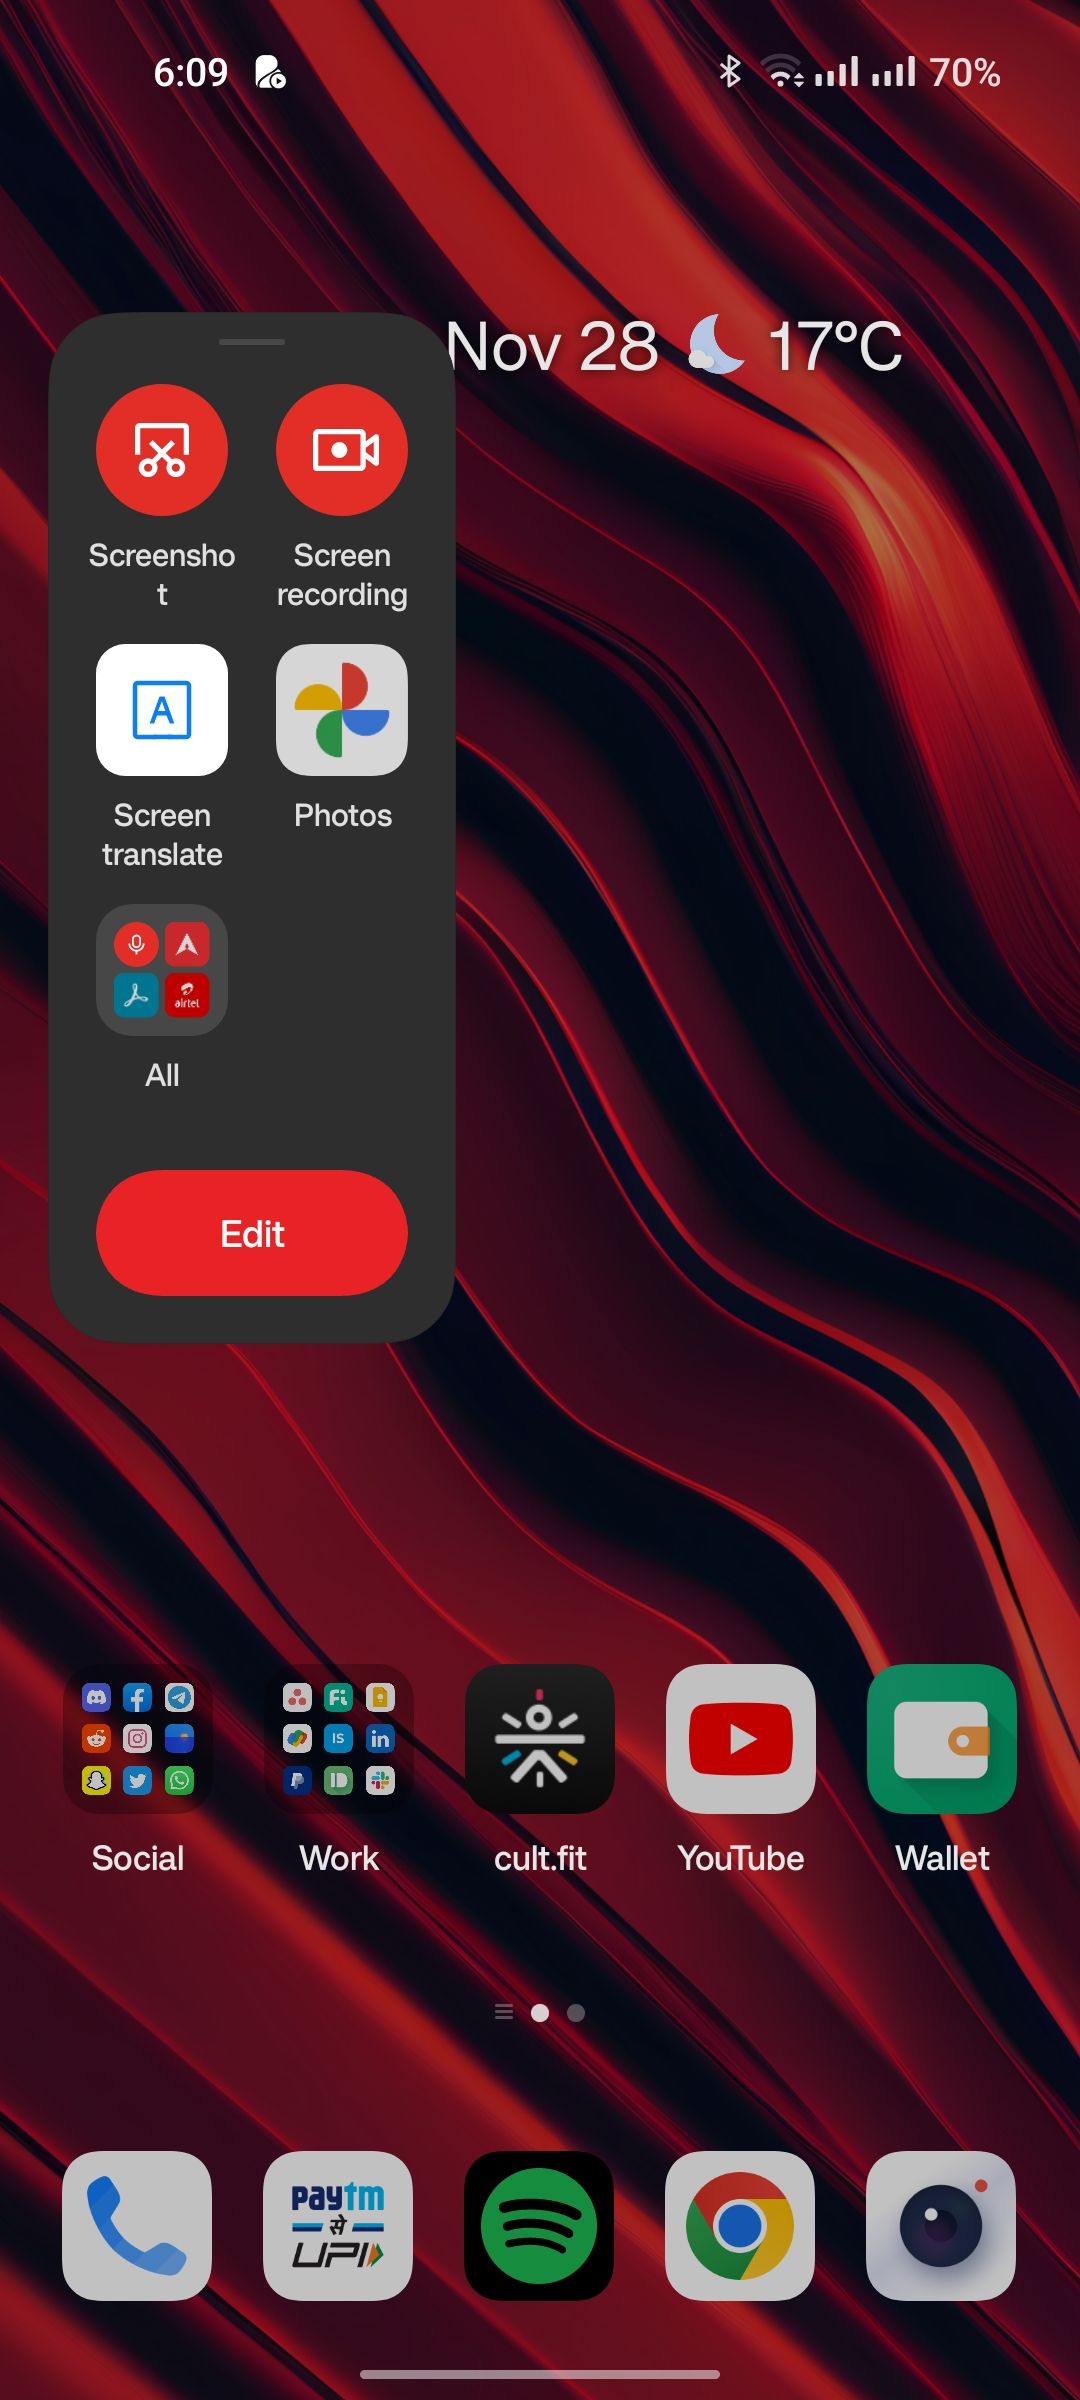 Smart Sidebar being accessed on the home screen